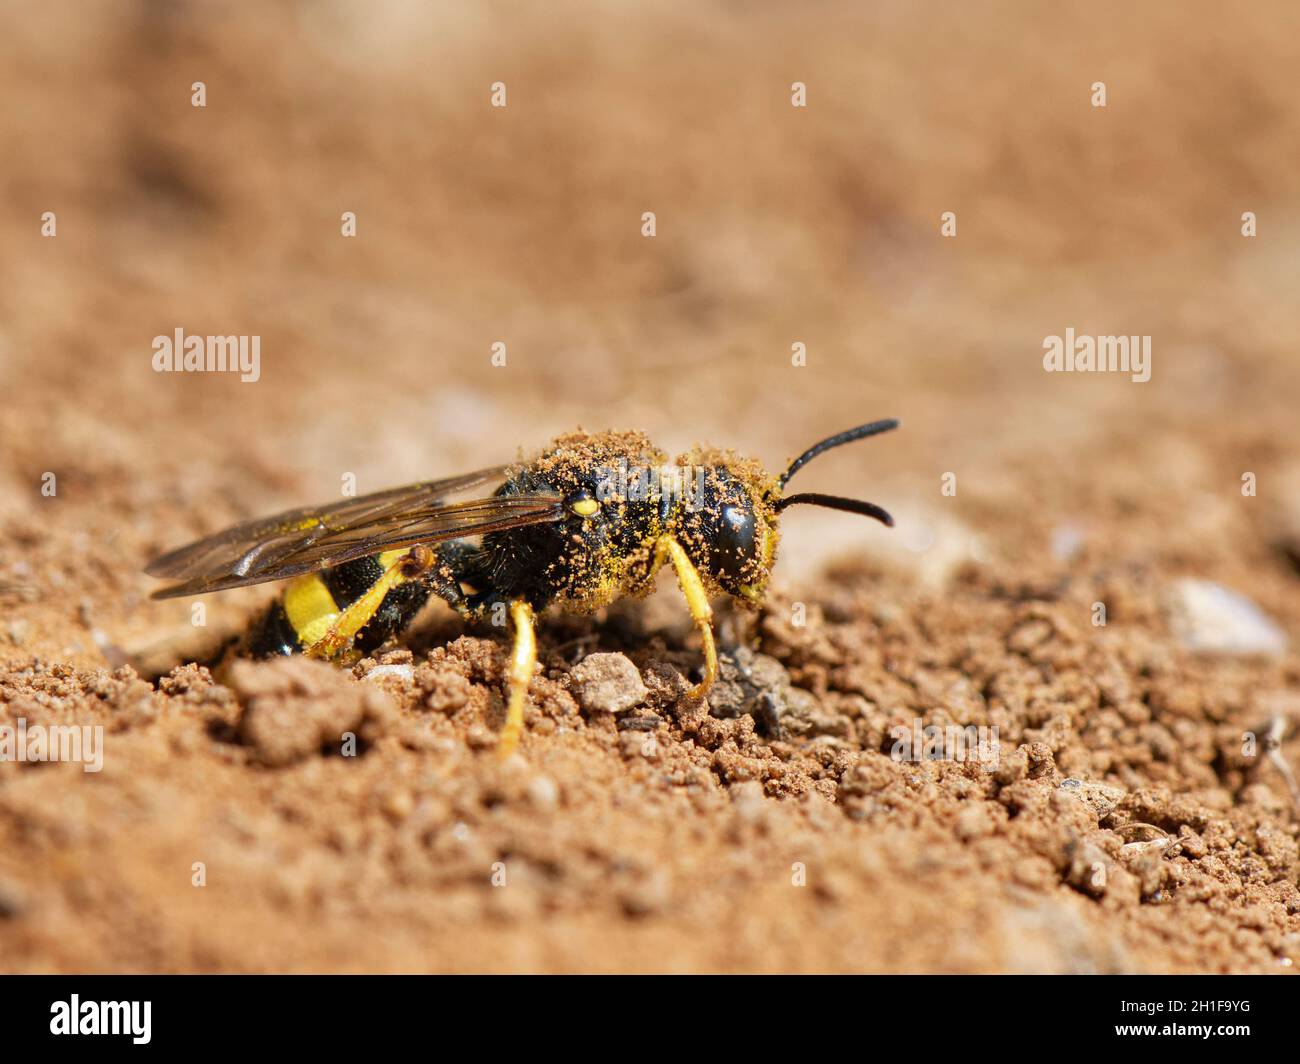 Ornate tailed digger wasp (Cerceris rybyensis) emerging from her nest burrow, The Gower, Glamorgan, Wales, UK. Stock Photo